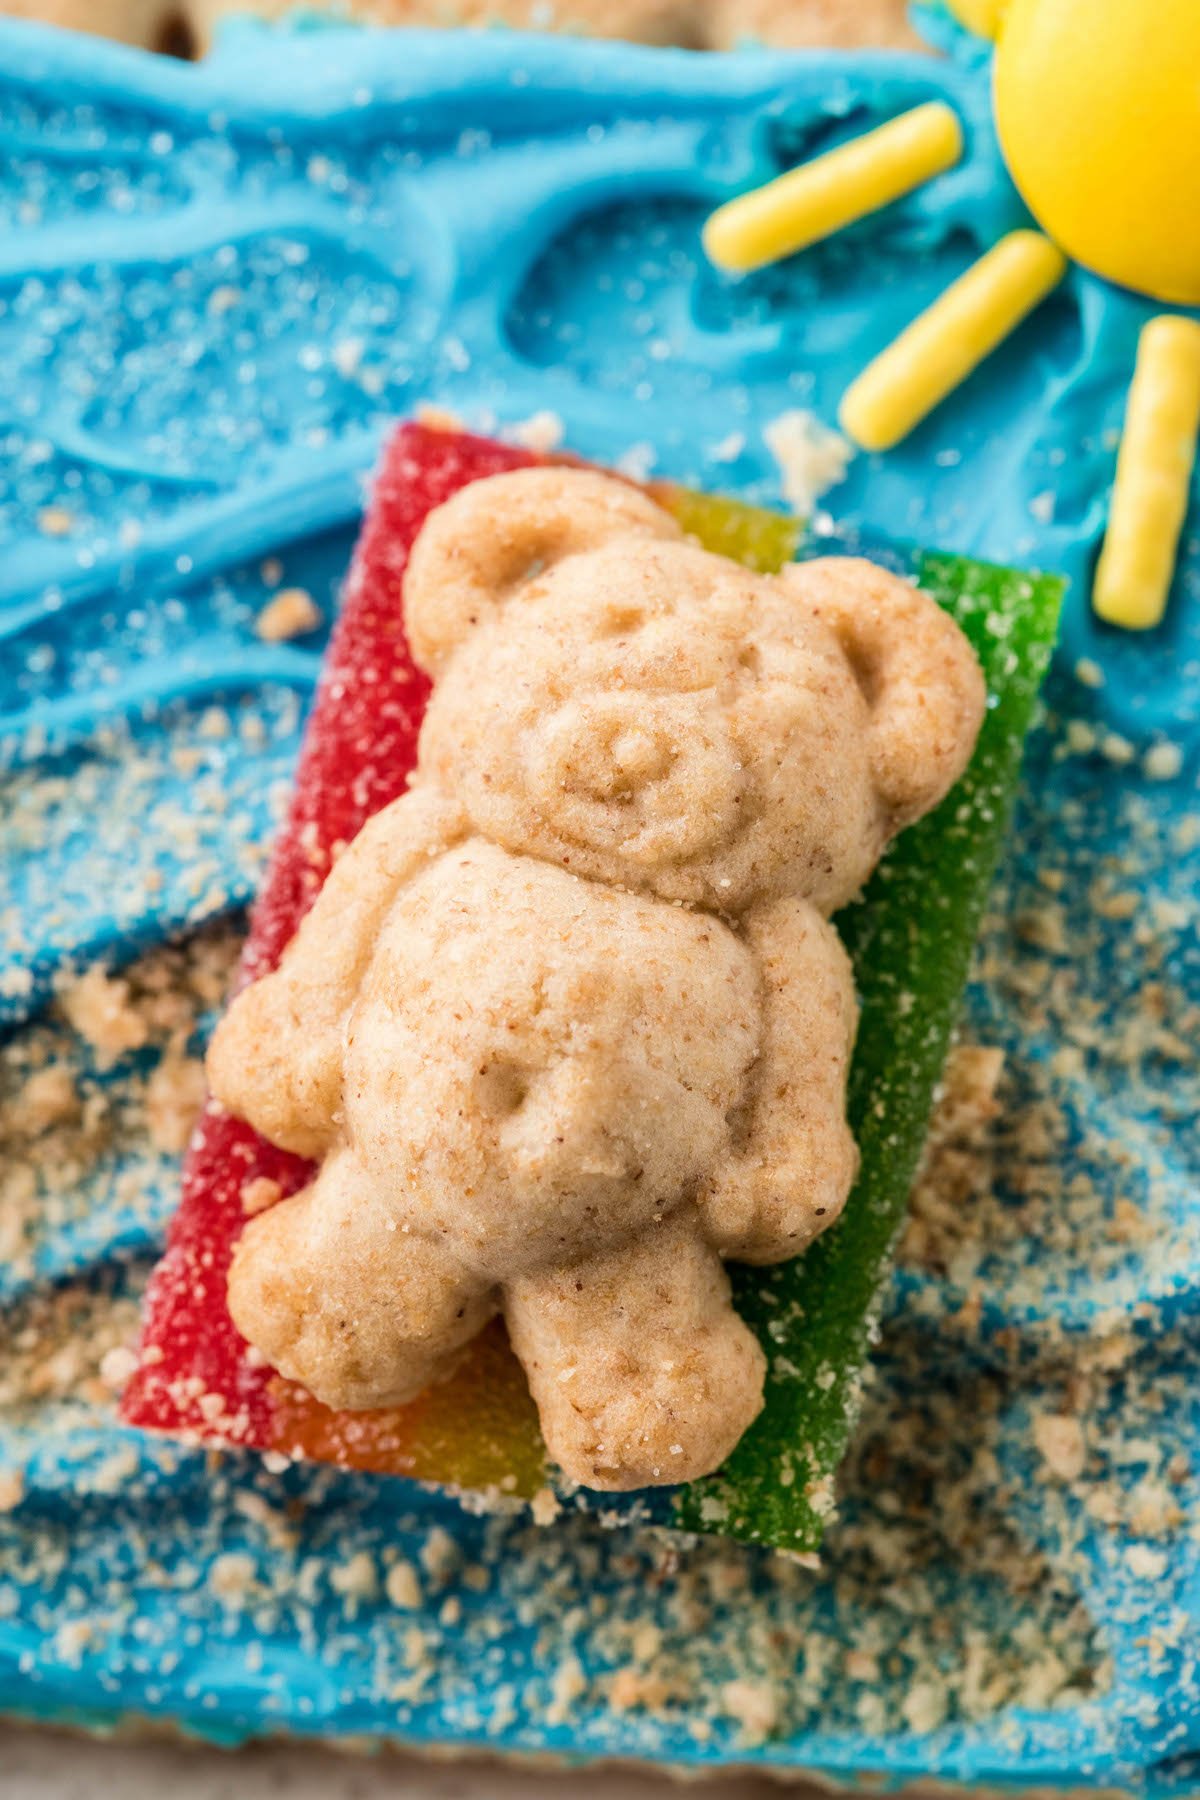 up close view of teddy graham snack that looks like a beach